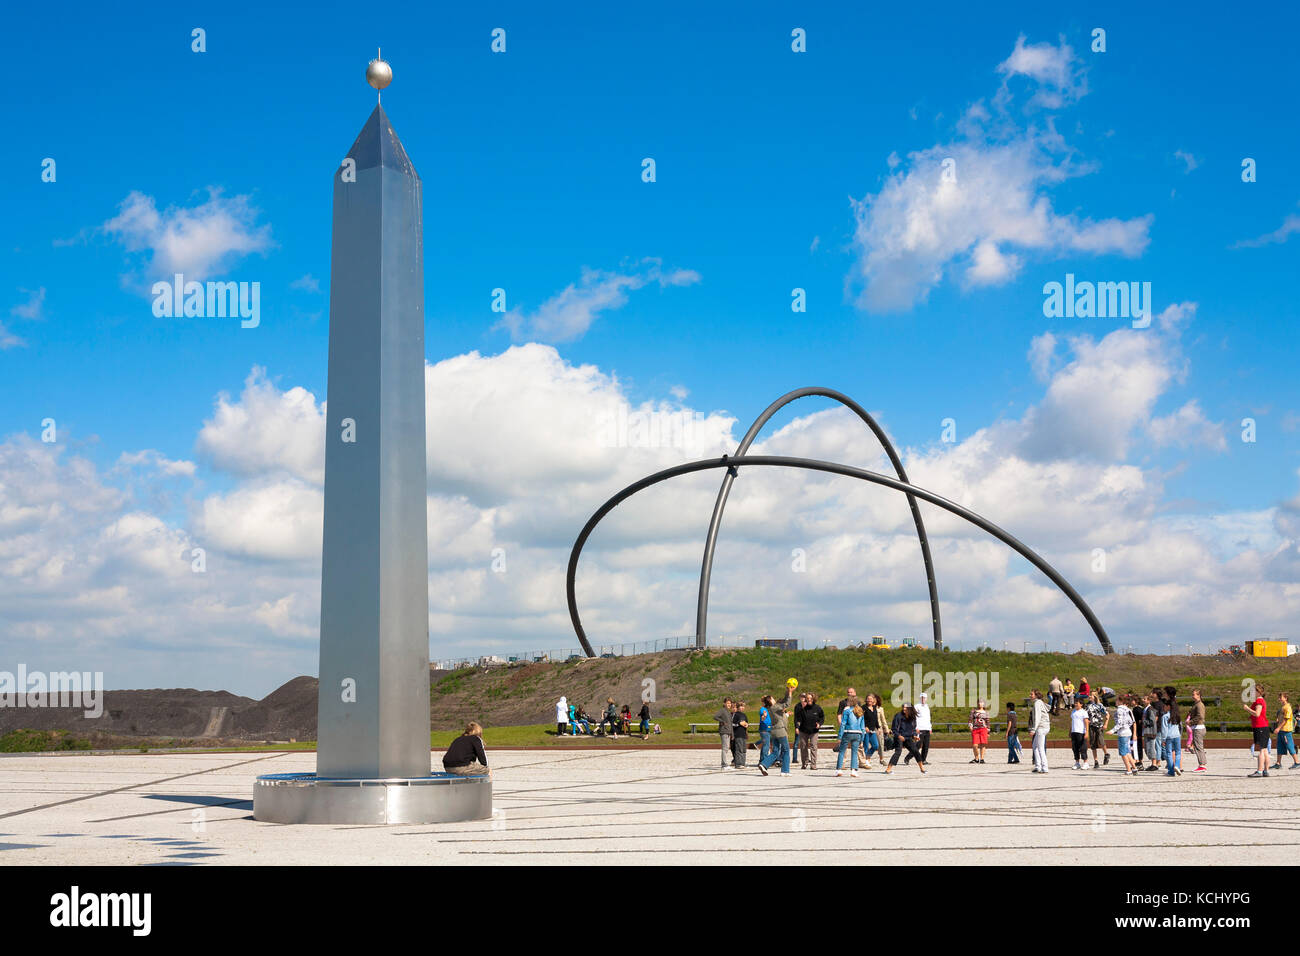 Germany, Ruhr area, Herten, obelisk on the heap Hoheward (the obelisk is the indicator of a large sund dial) behind it the 50 meter high arches of the Stock Photo